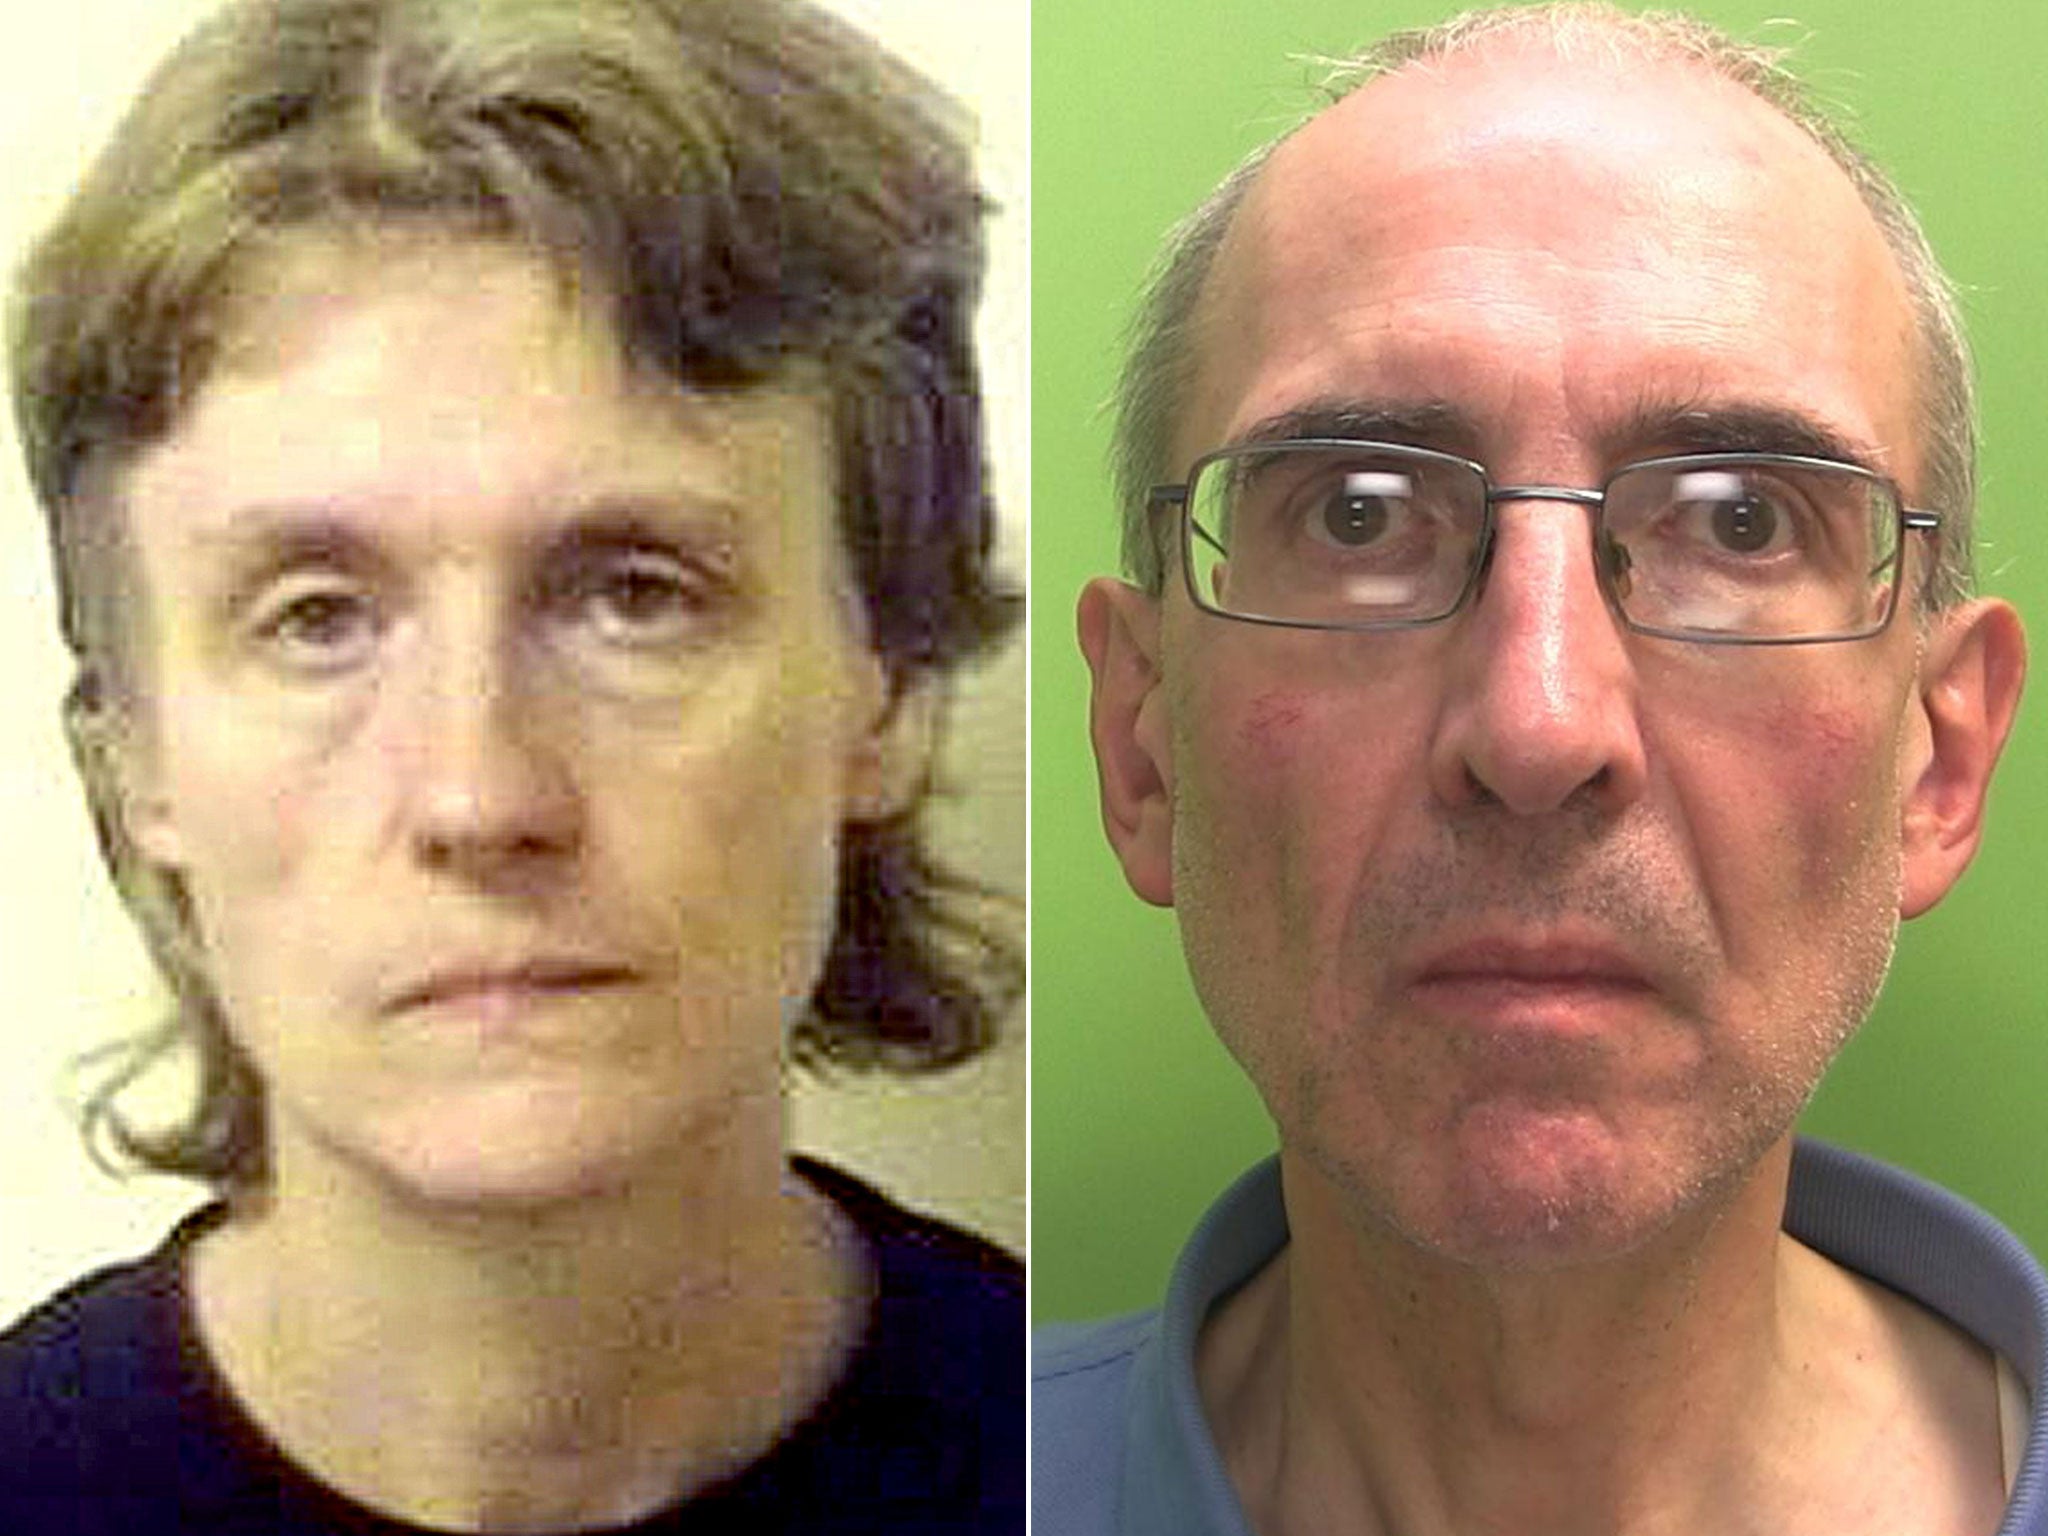 Susan Edwards, 56, and Christopher Edwards, 57, are alleged to have murdered the couple in 1998